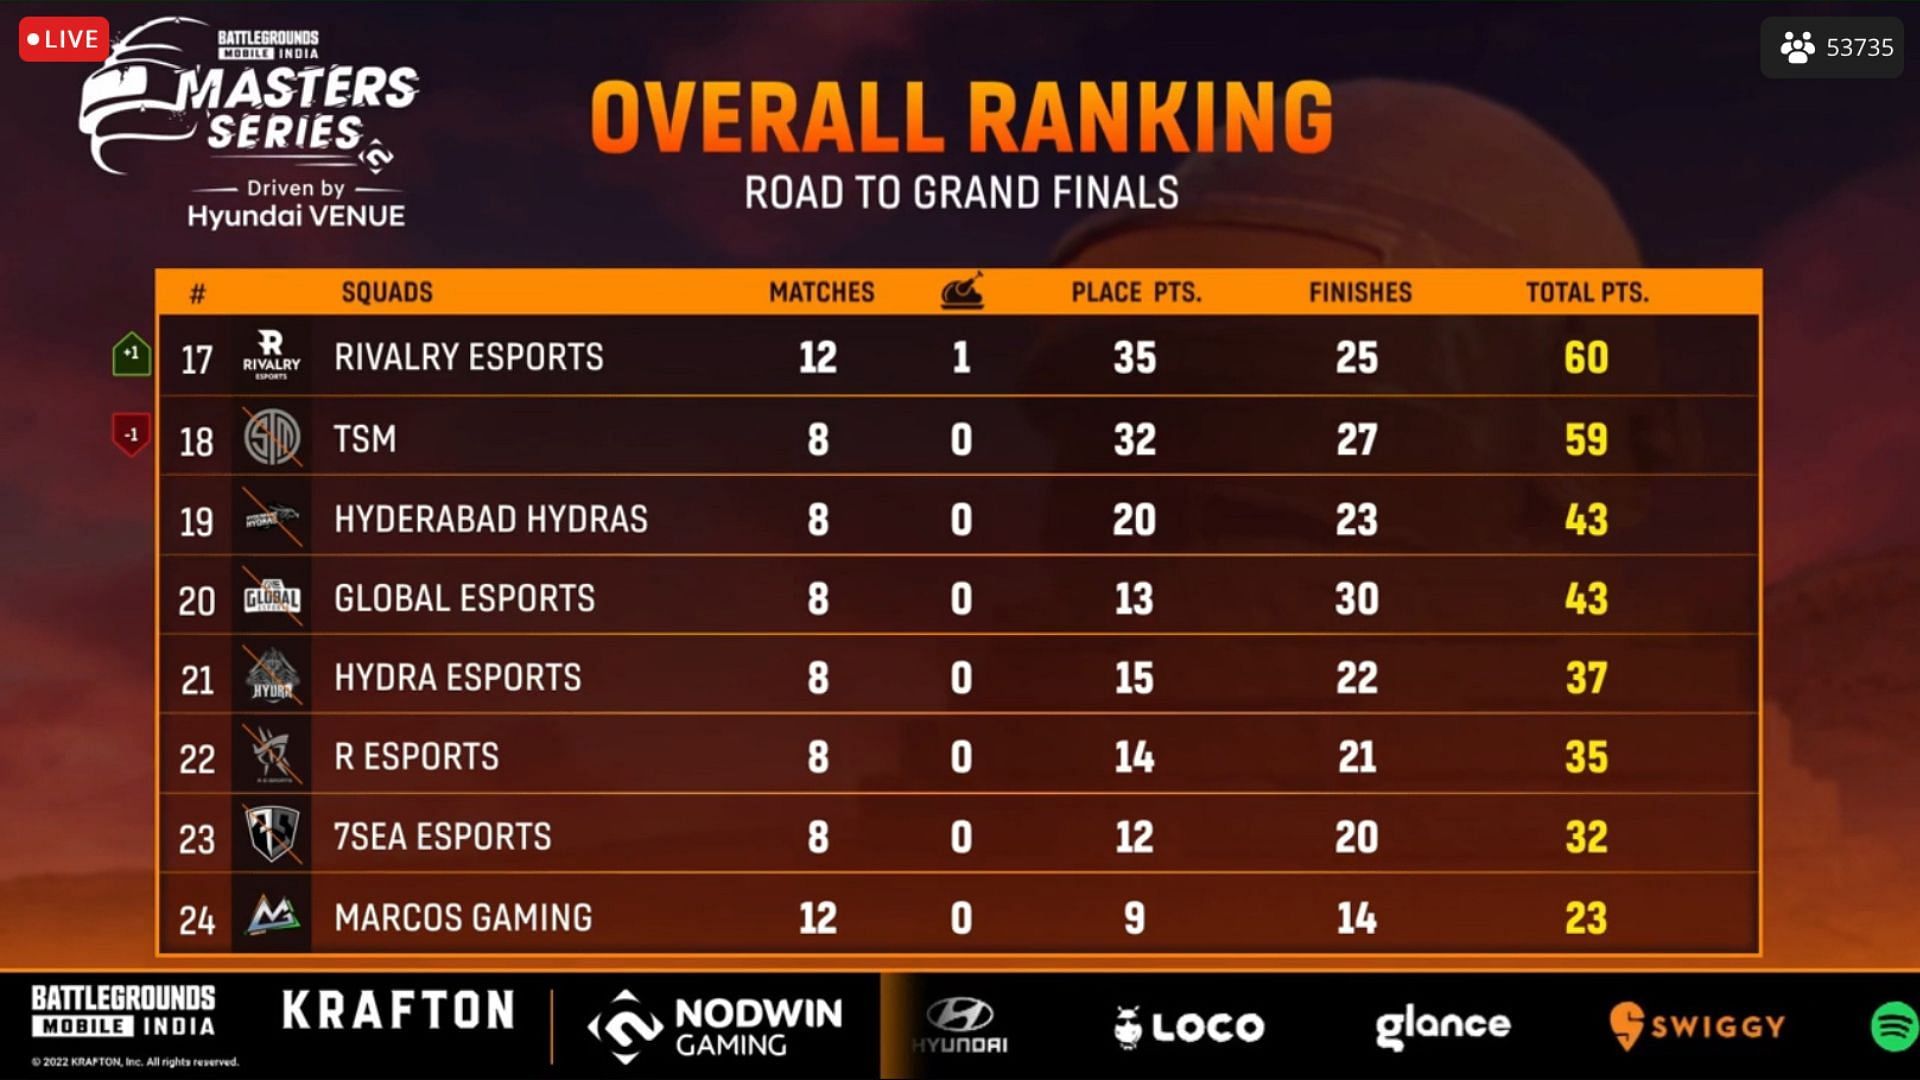 Marcos Gaming placed 24th (Image via Loco)